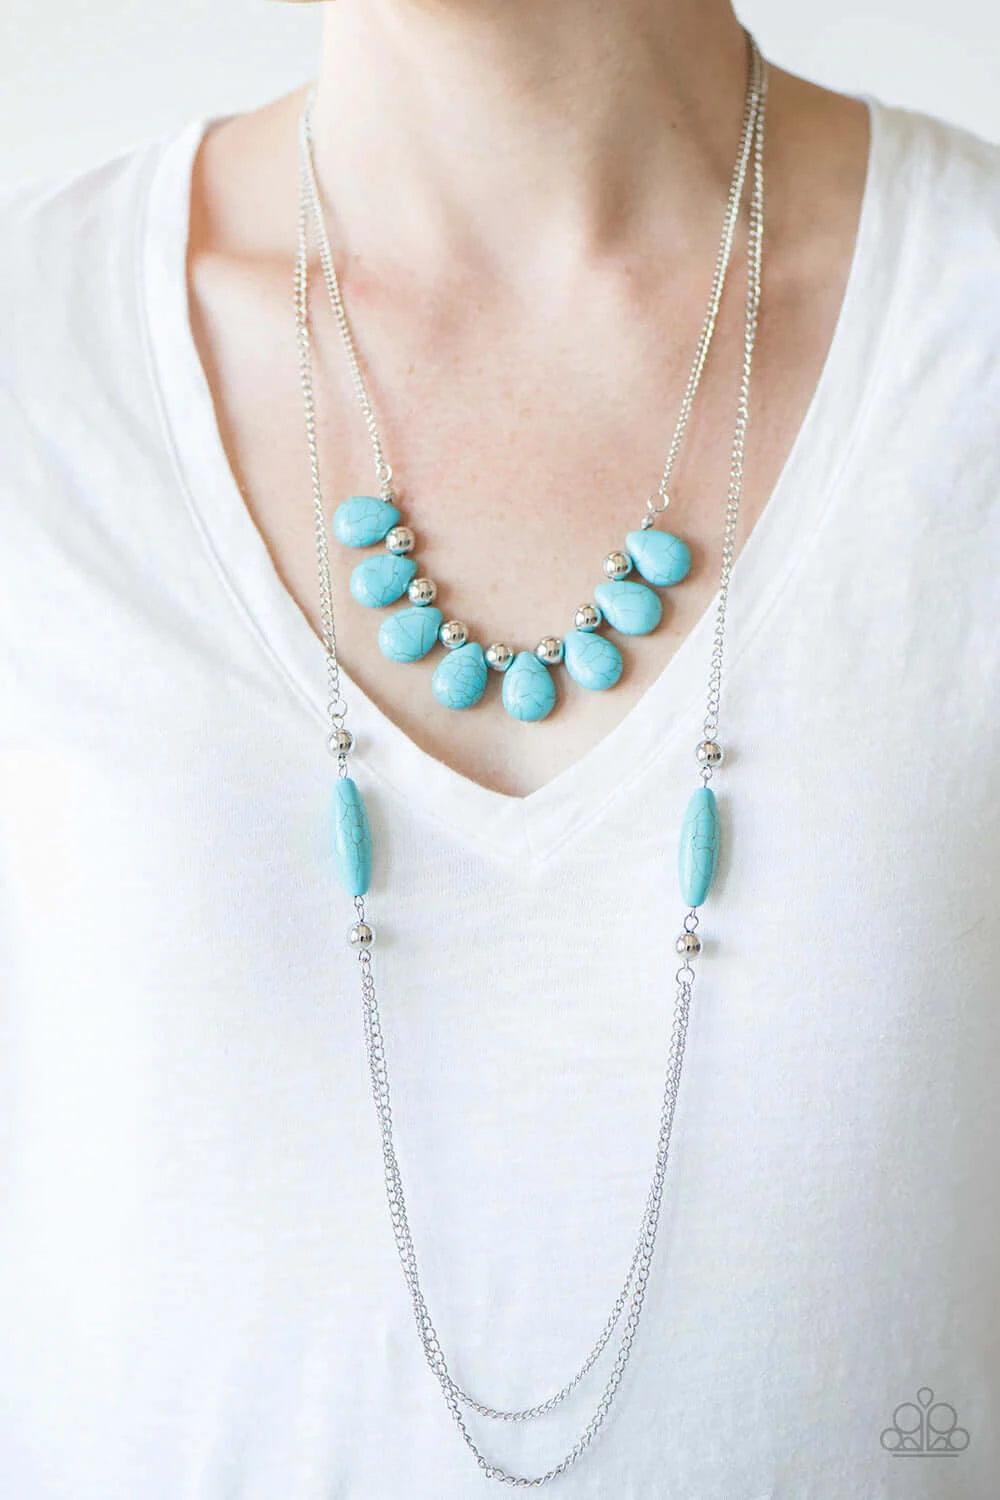 Paparazzi Accessories  - Call Me Mother Nature #L148 - Blue Necklace